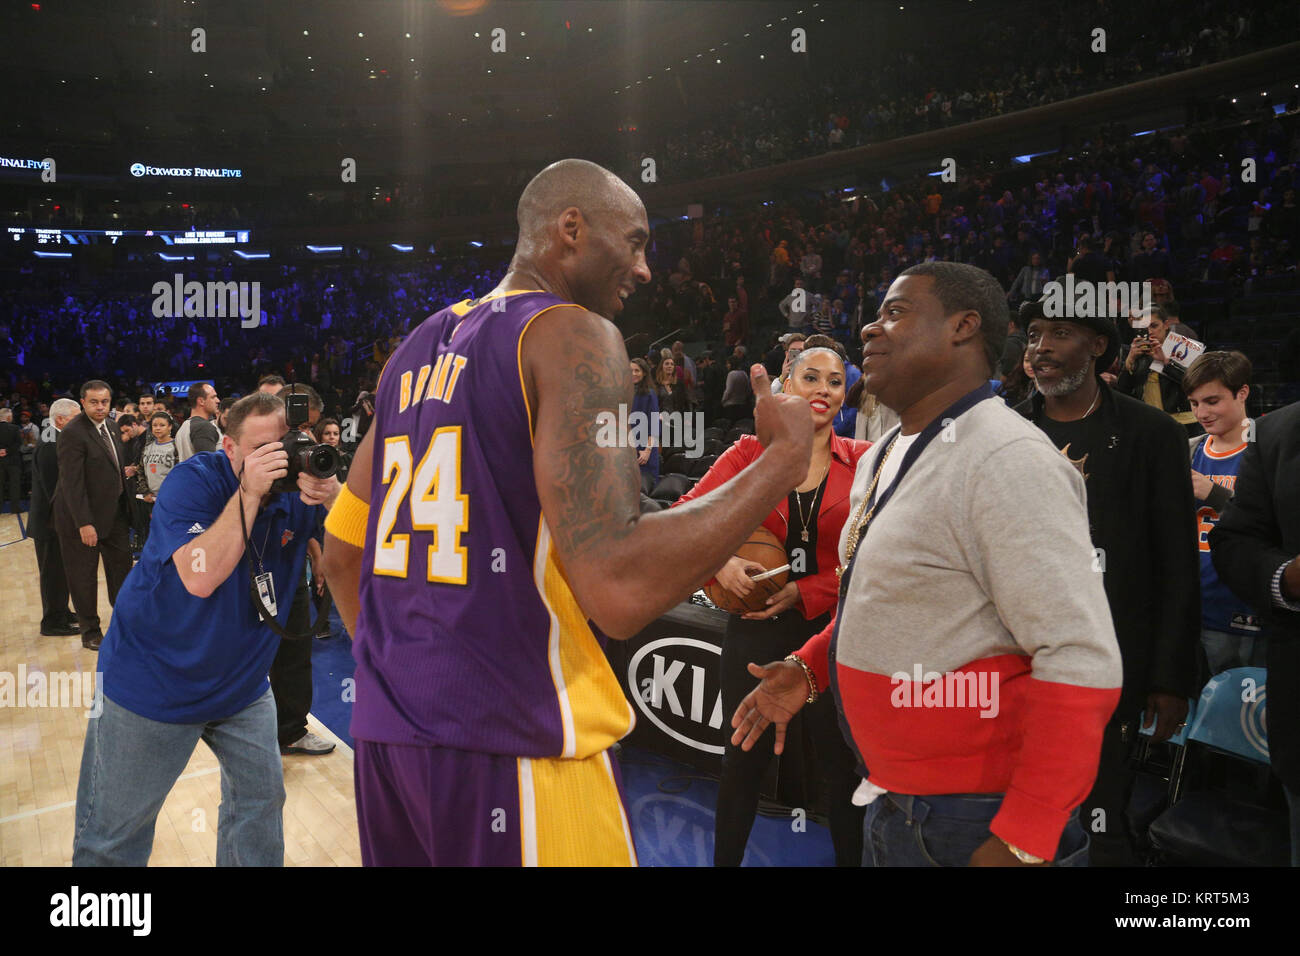 NEW YORK, NY - NOVEMBER 08: (Embargoed till November 10, 2015) Magic Johnson, Tracy Morgan with wife Megan Wollover sit with Michael K. Williams and  Director Spike Lee at the New York Knicks vs Los Angeles Lakers game at Madison Square Garden on November 8, 2015 in New York City.   People:  Tracy Morgan, Kobe Bryant Stock Photo